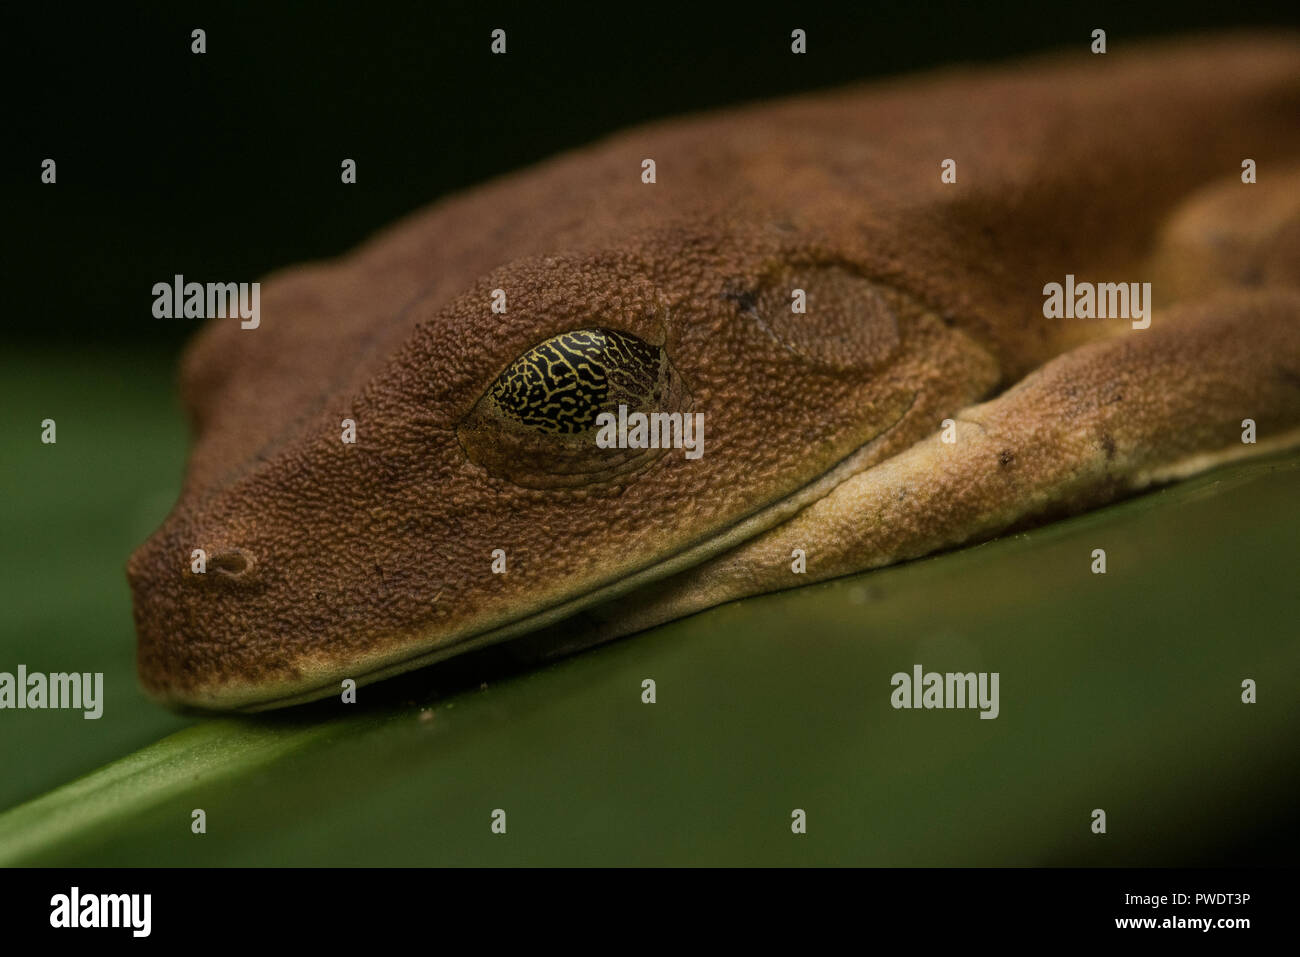 A map tree frog (Boana geographica) with its eyes closed, its 3rd eyelid or nictitating membrane covers its eye but allows it to still see threats. Stock Photo